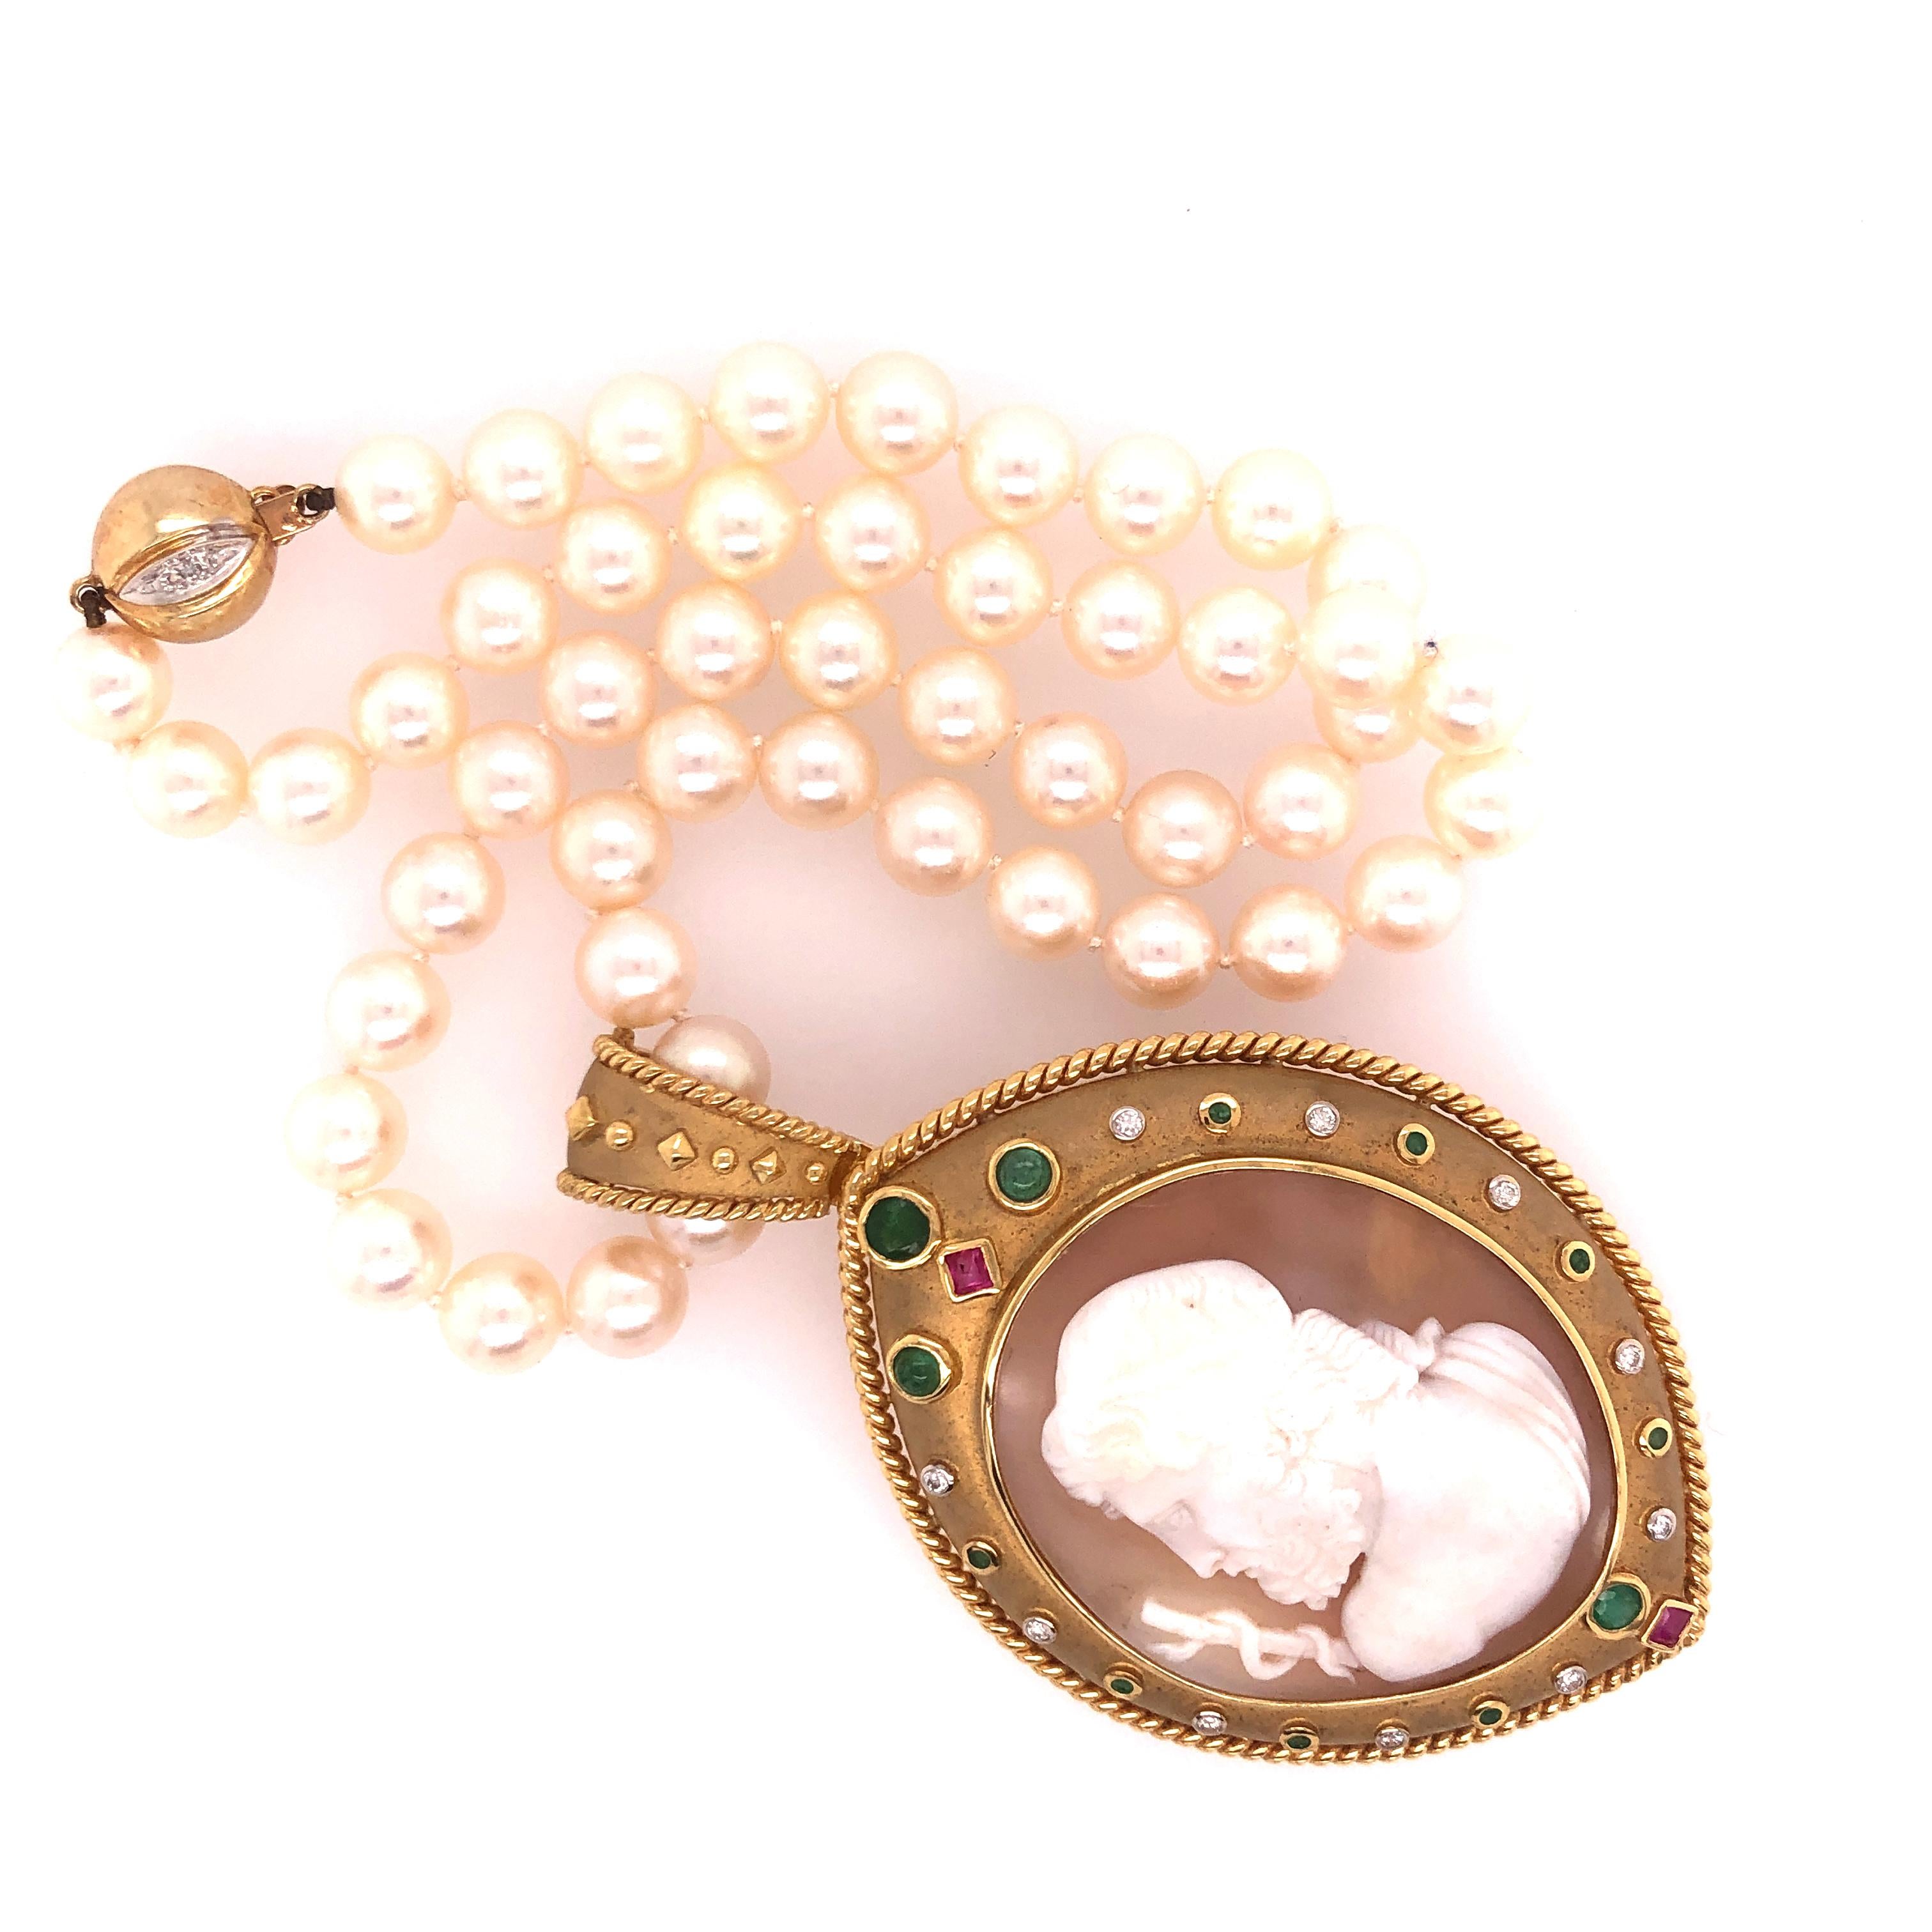 Women's Yellow Gold Precious Stone Cameo Pendant on Pearl Necklace